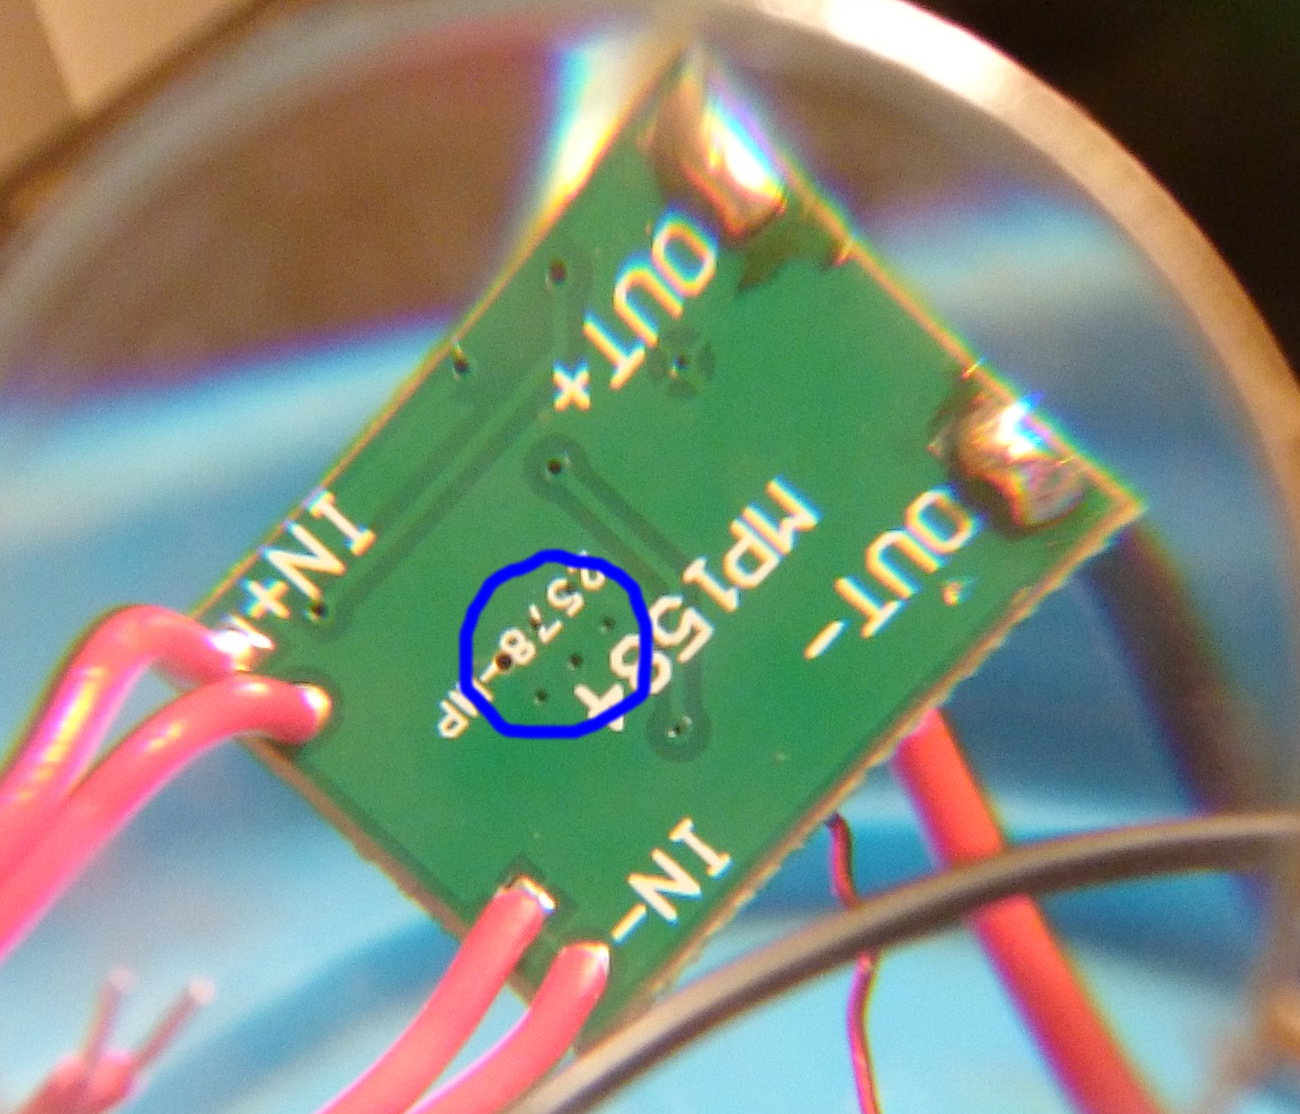 Close-up of the thermal vias, which are circled in blue, on the DC regulator board